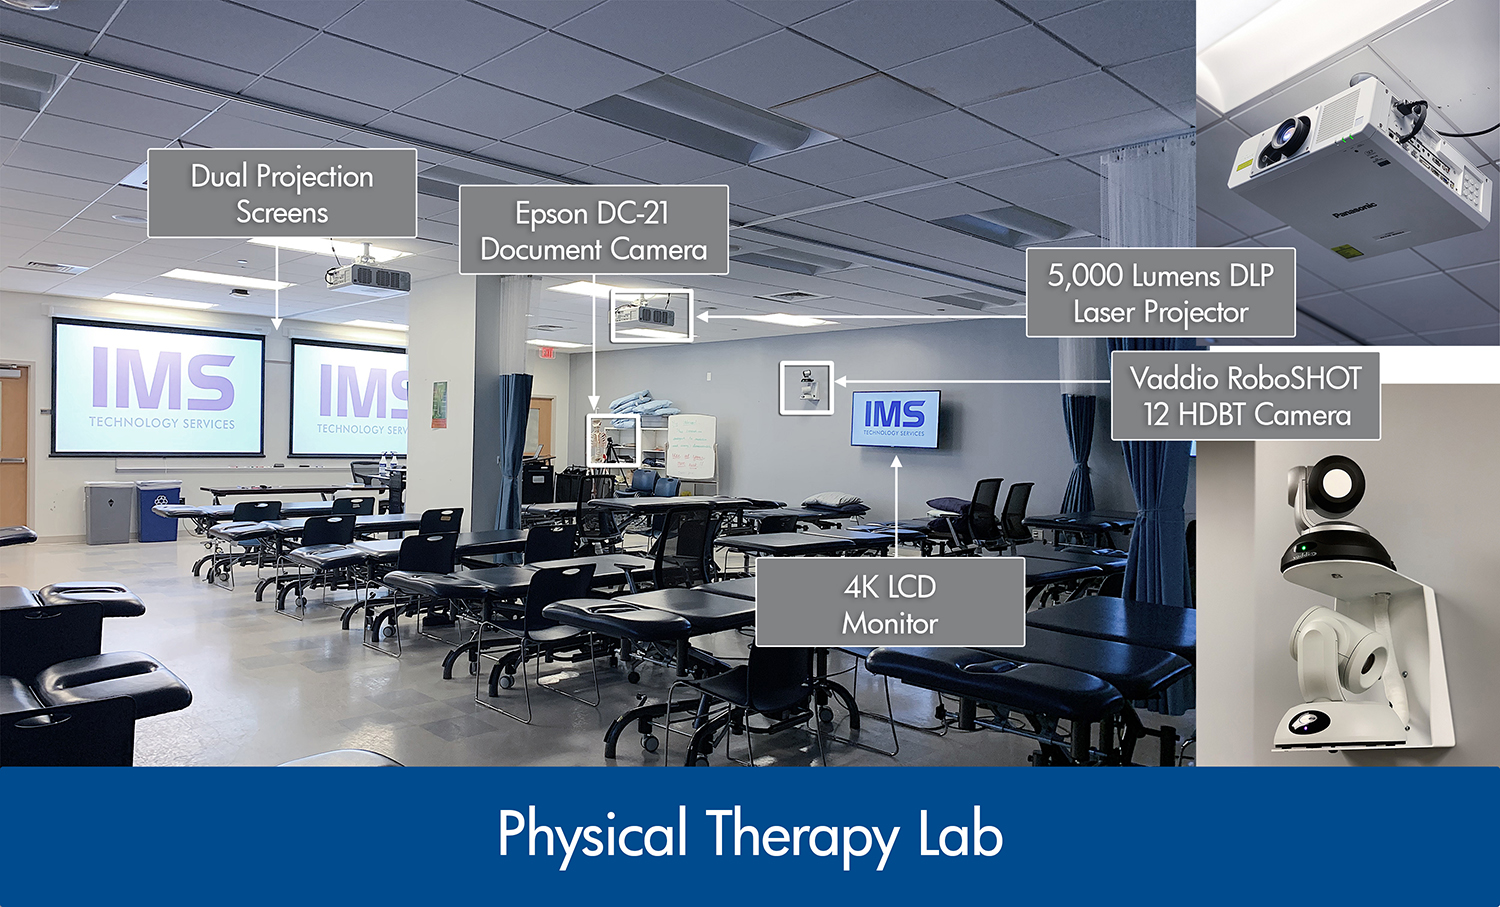 Systems integration in physical therapy lab